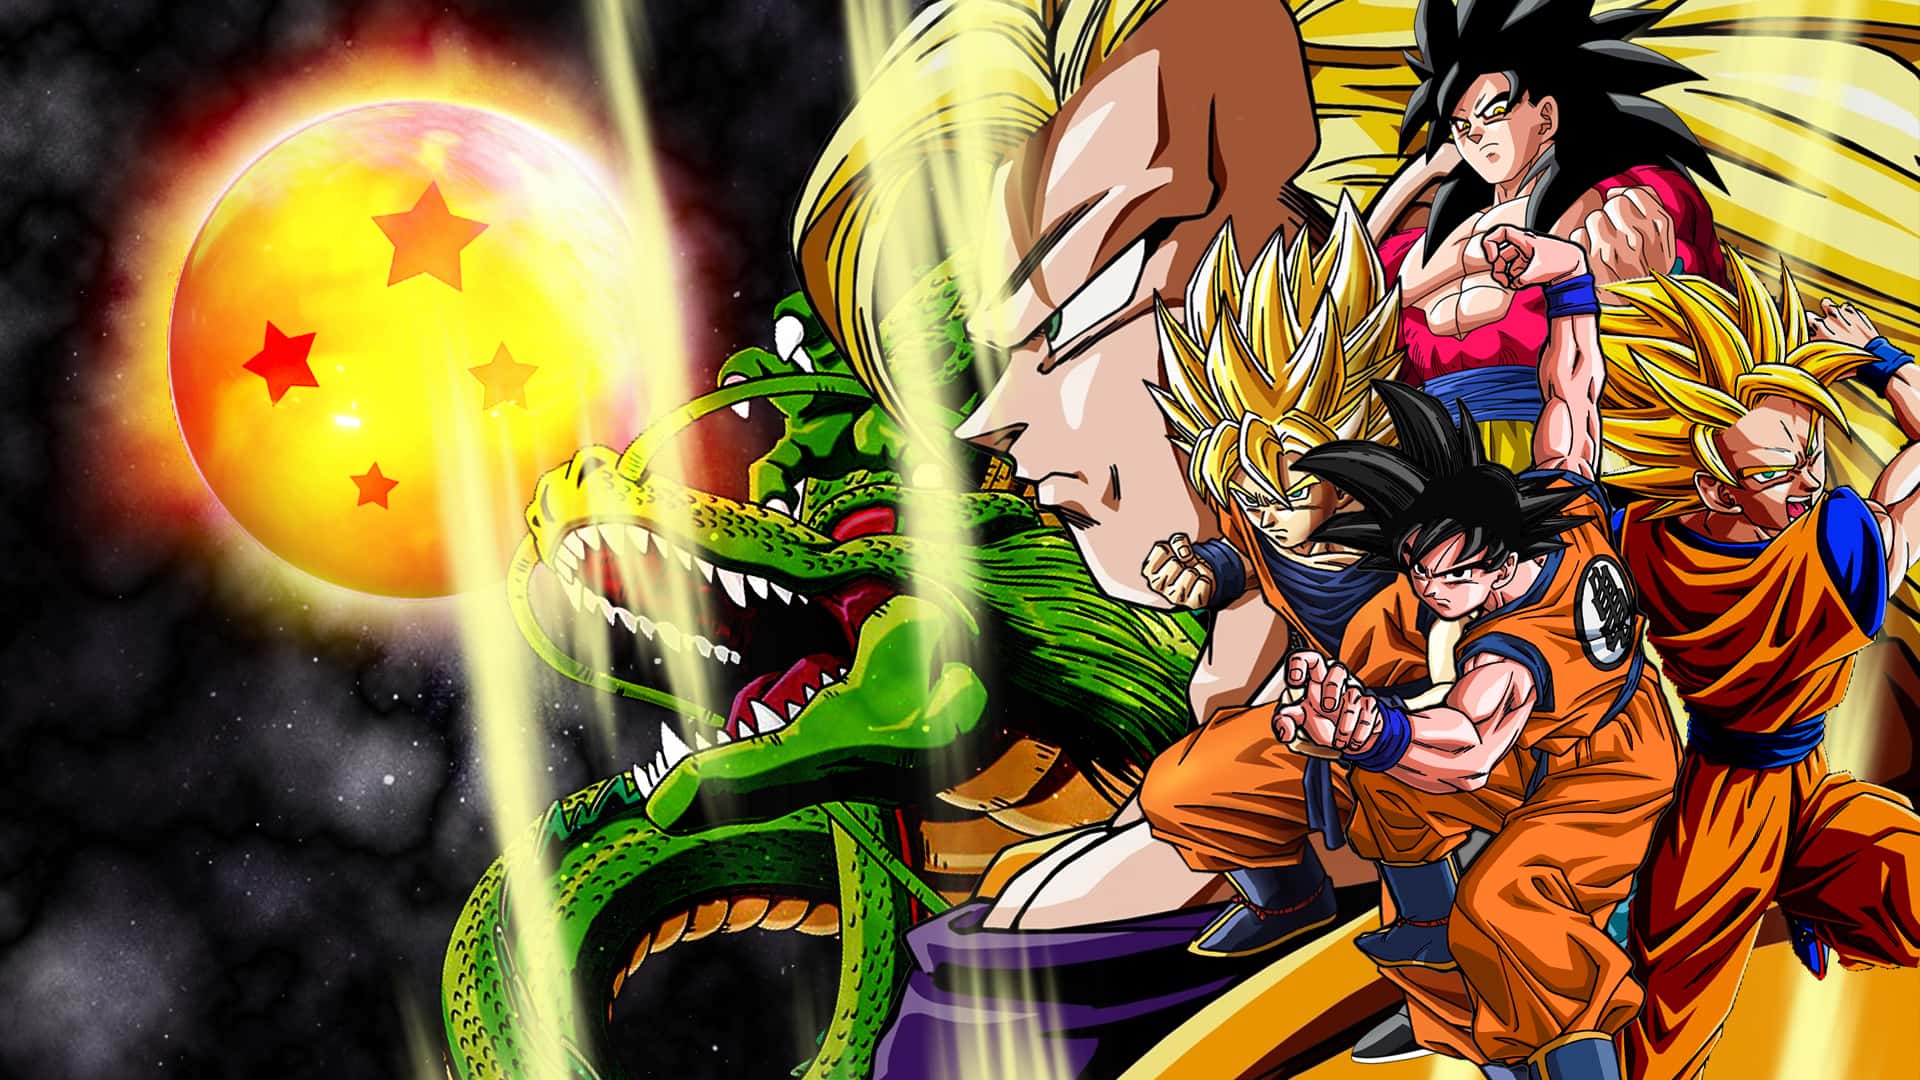 29 Ballzy Facts About Dragon Ball Z Images, Photos, Reviews